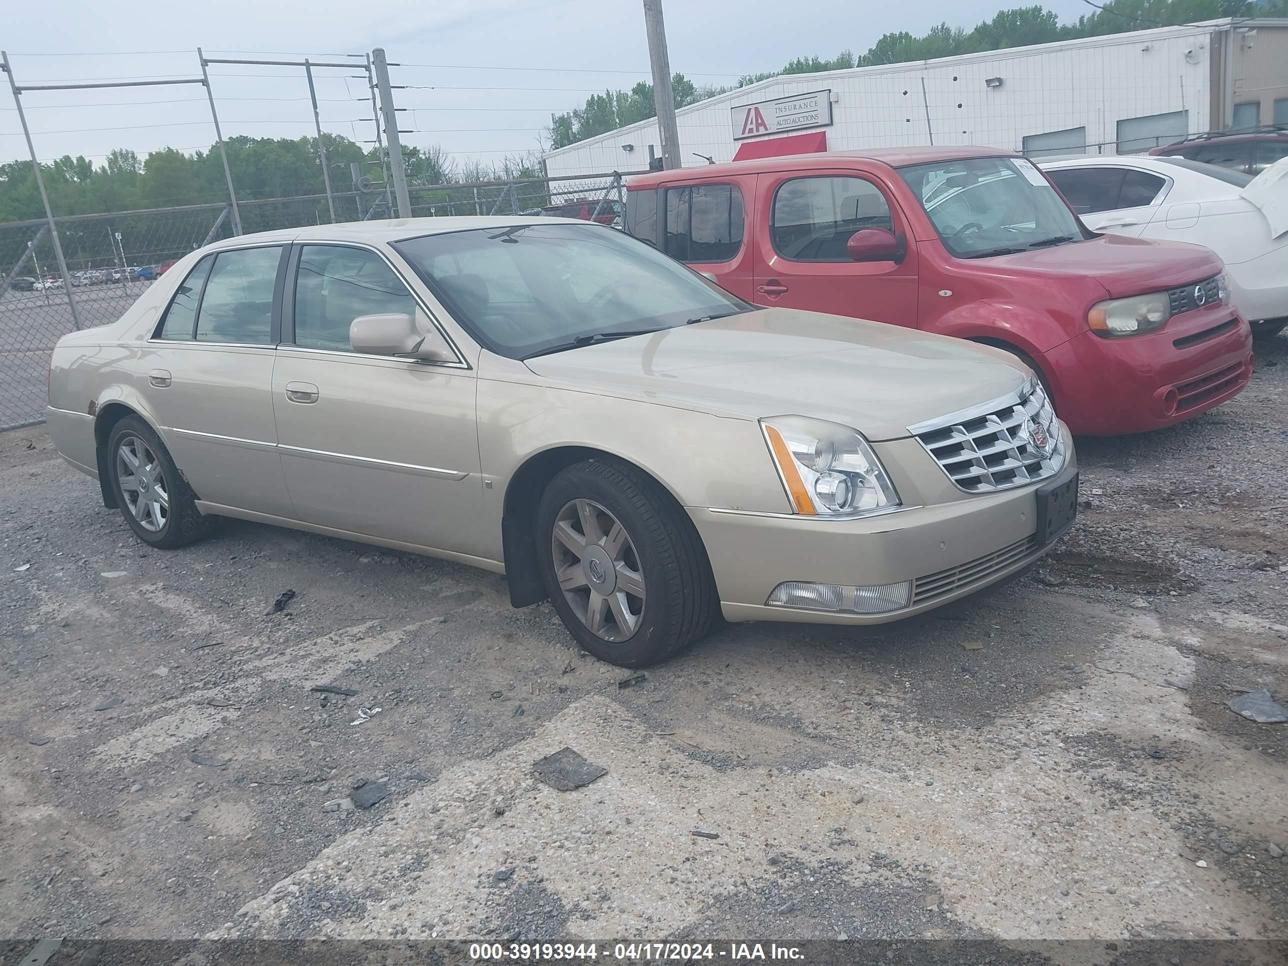 vin: 1G6KD57YX7U209483 1G6KD57YX7U209483 2007 cadillac dts 4600 for Sale in 37404, 2801 Asbury Park St, Chattanooga, Tennessee, USA